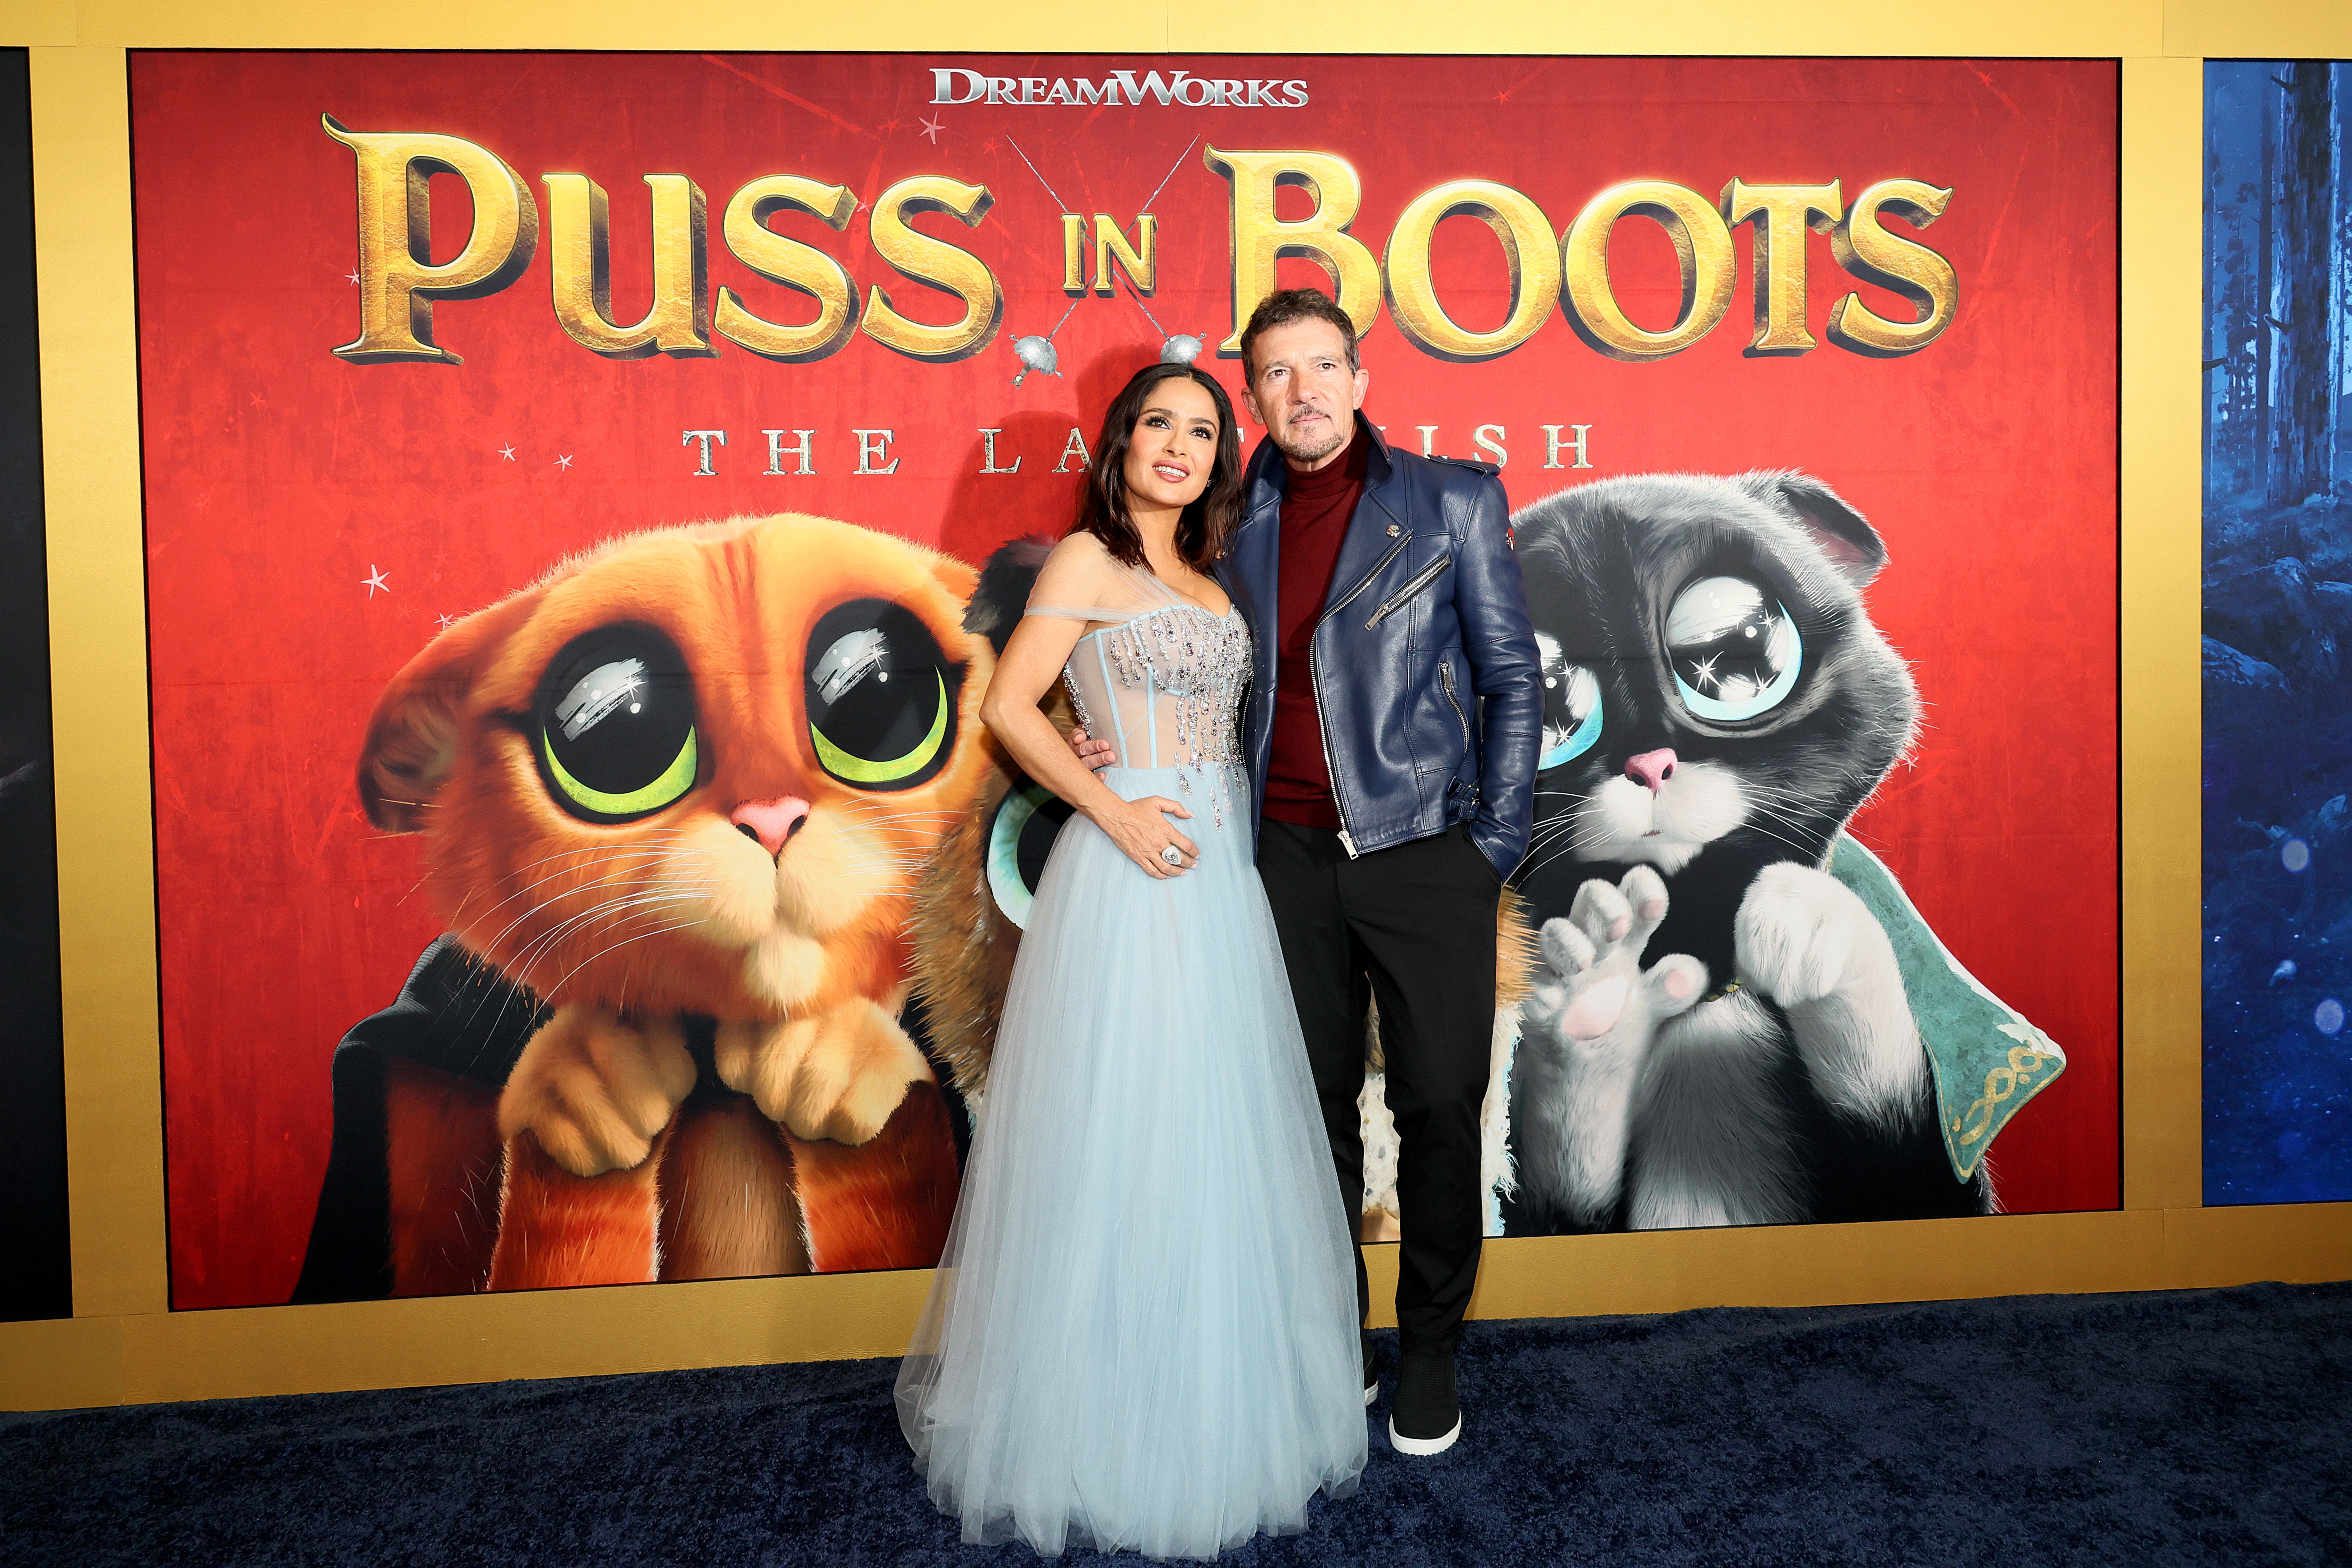 Salma Hayek Pinault and Antonio Banderas attending Puss In Boots: The Last Wish world premiere in December